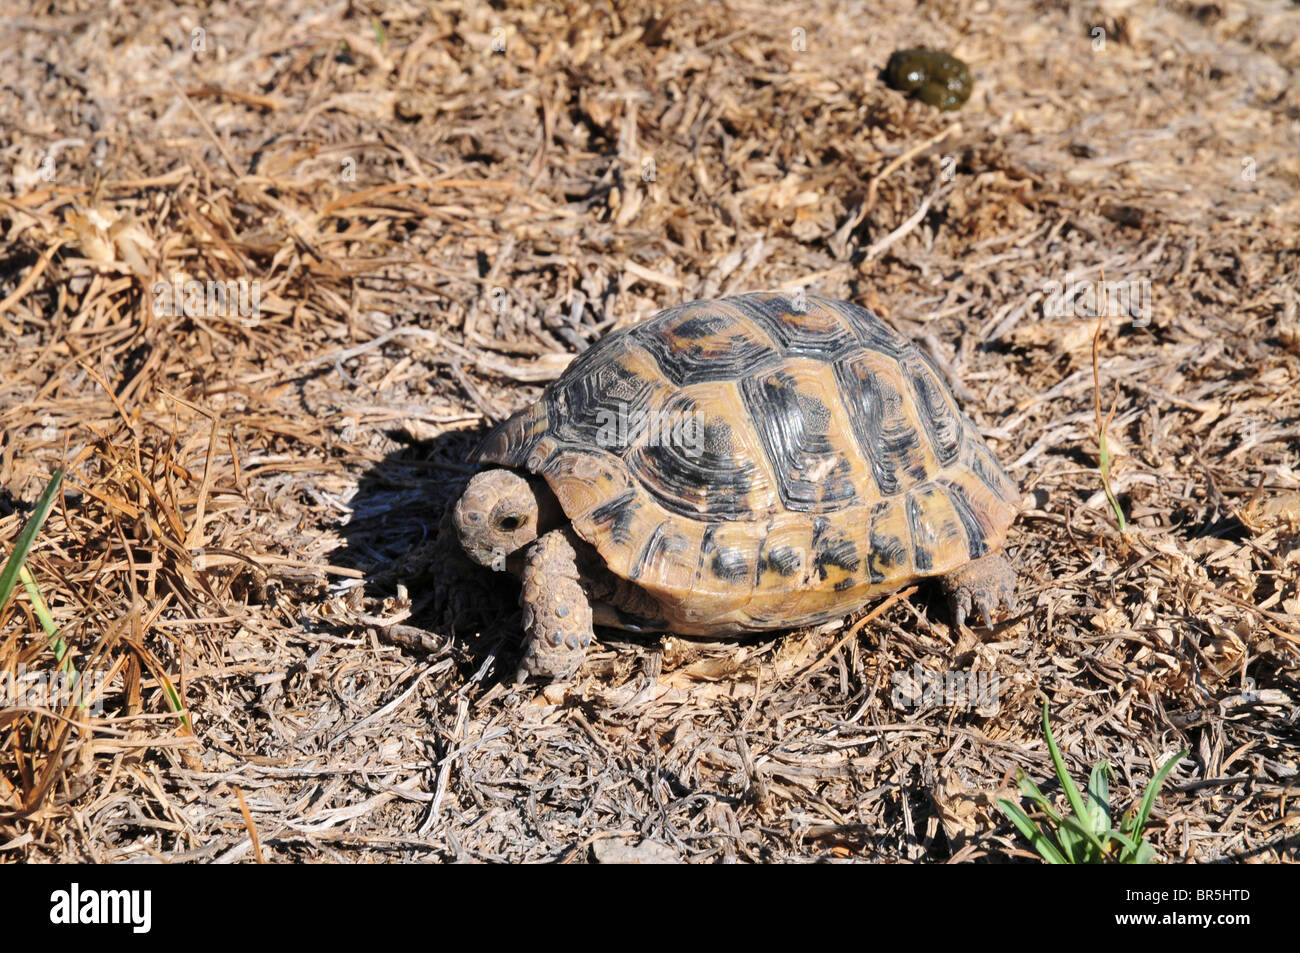 Close up of a Spur-thighed Tortoise or Greek Tortoise (Testudo graeca) in a field. Israel Summer September Stock Photo